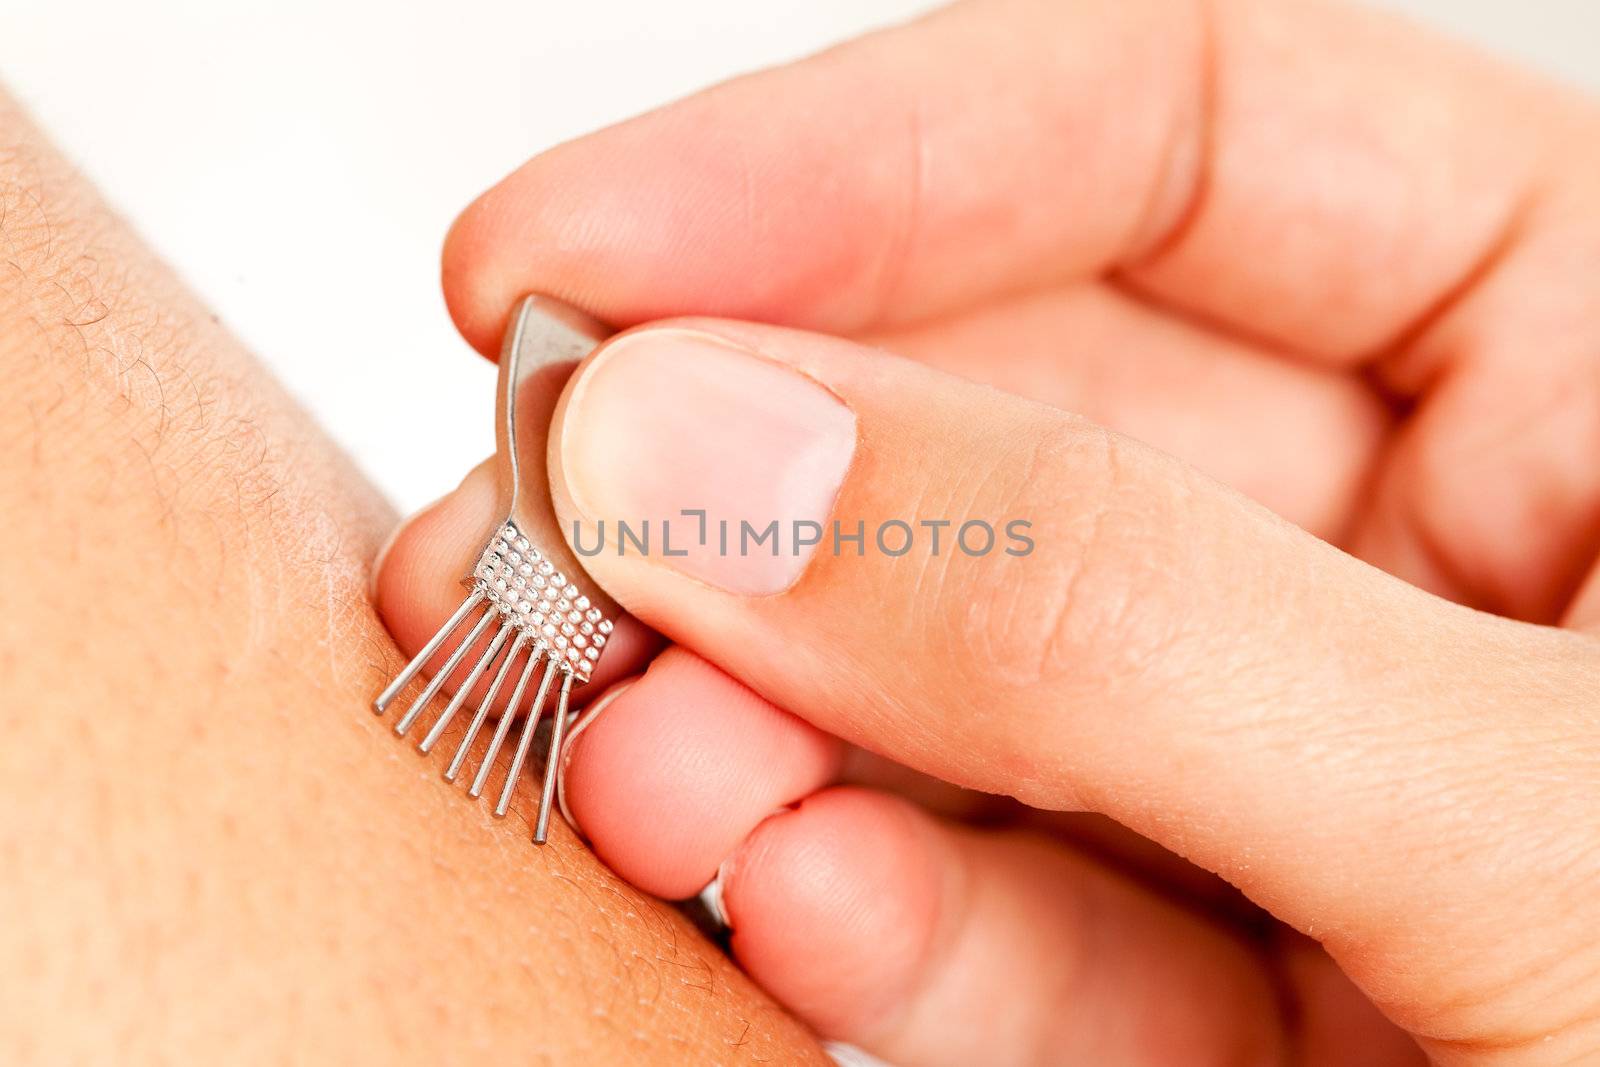 Macro detail of a pine brush Japanese Shonishin acupuncture tool being used on young boy's leg